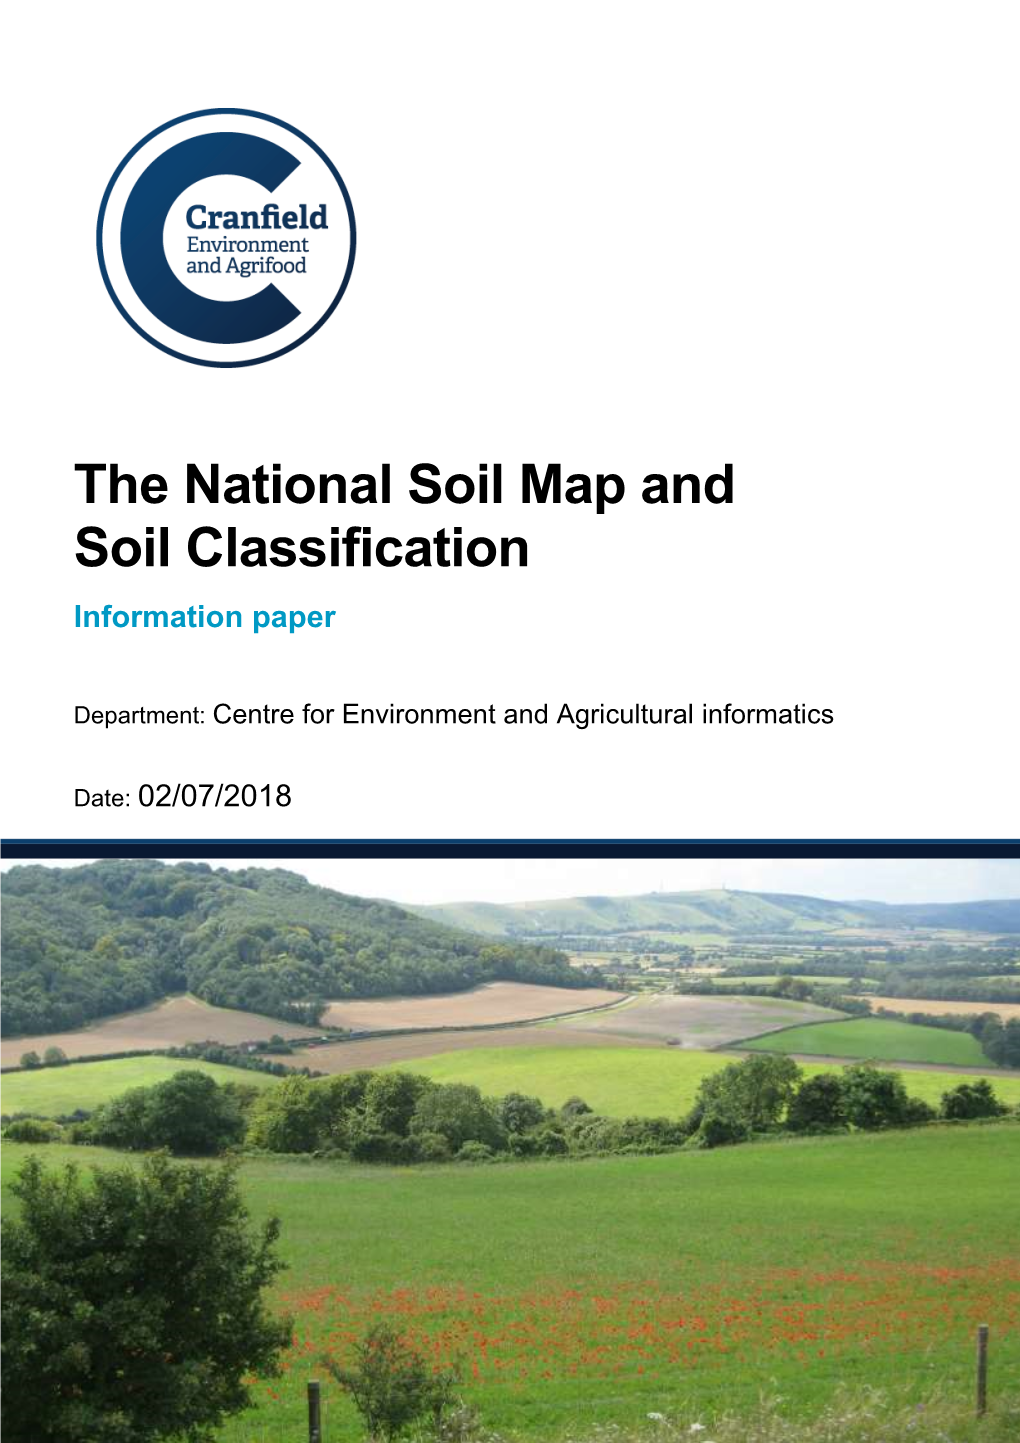 The National Soil Map and Soil Classification Copyright © Cranfield University, 2018